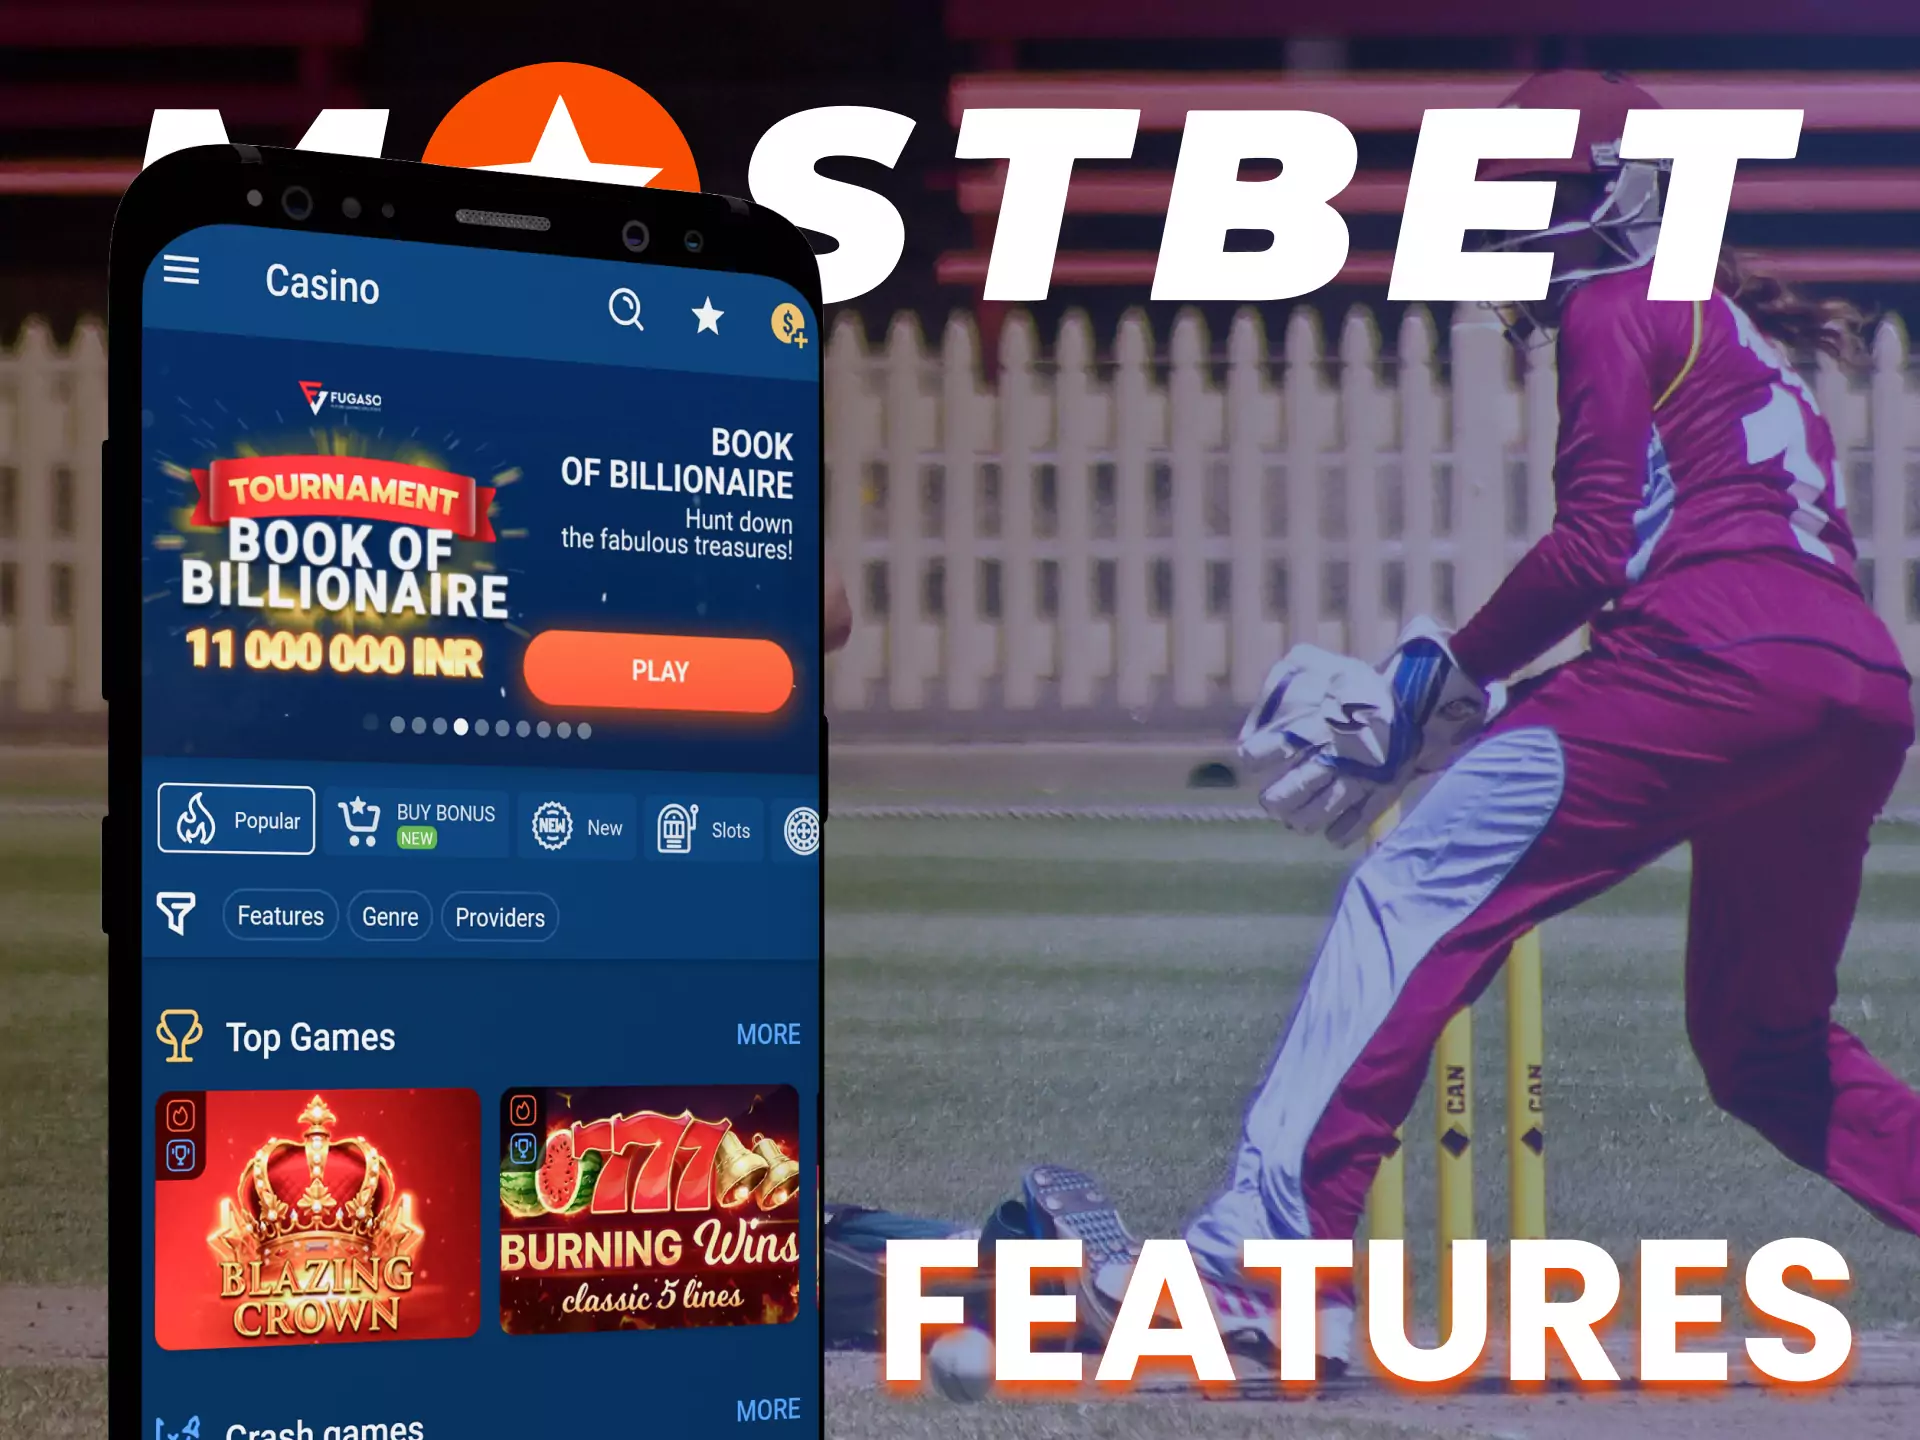 Learn about the many features of the Mostbet app.